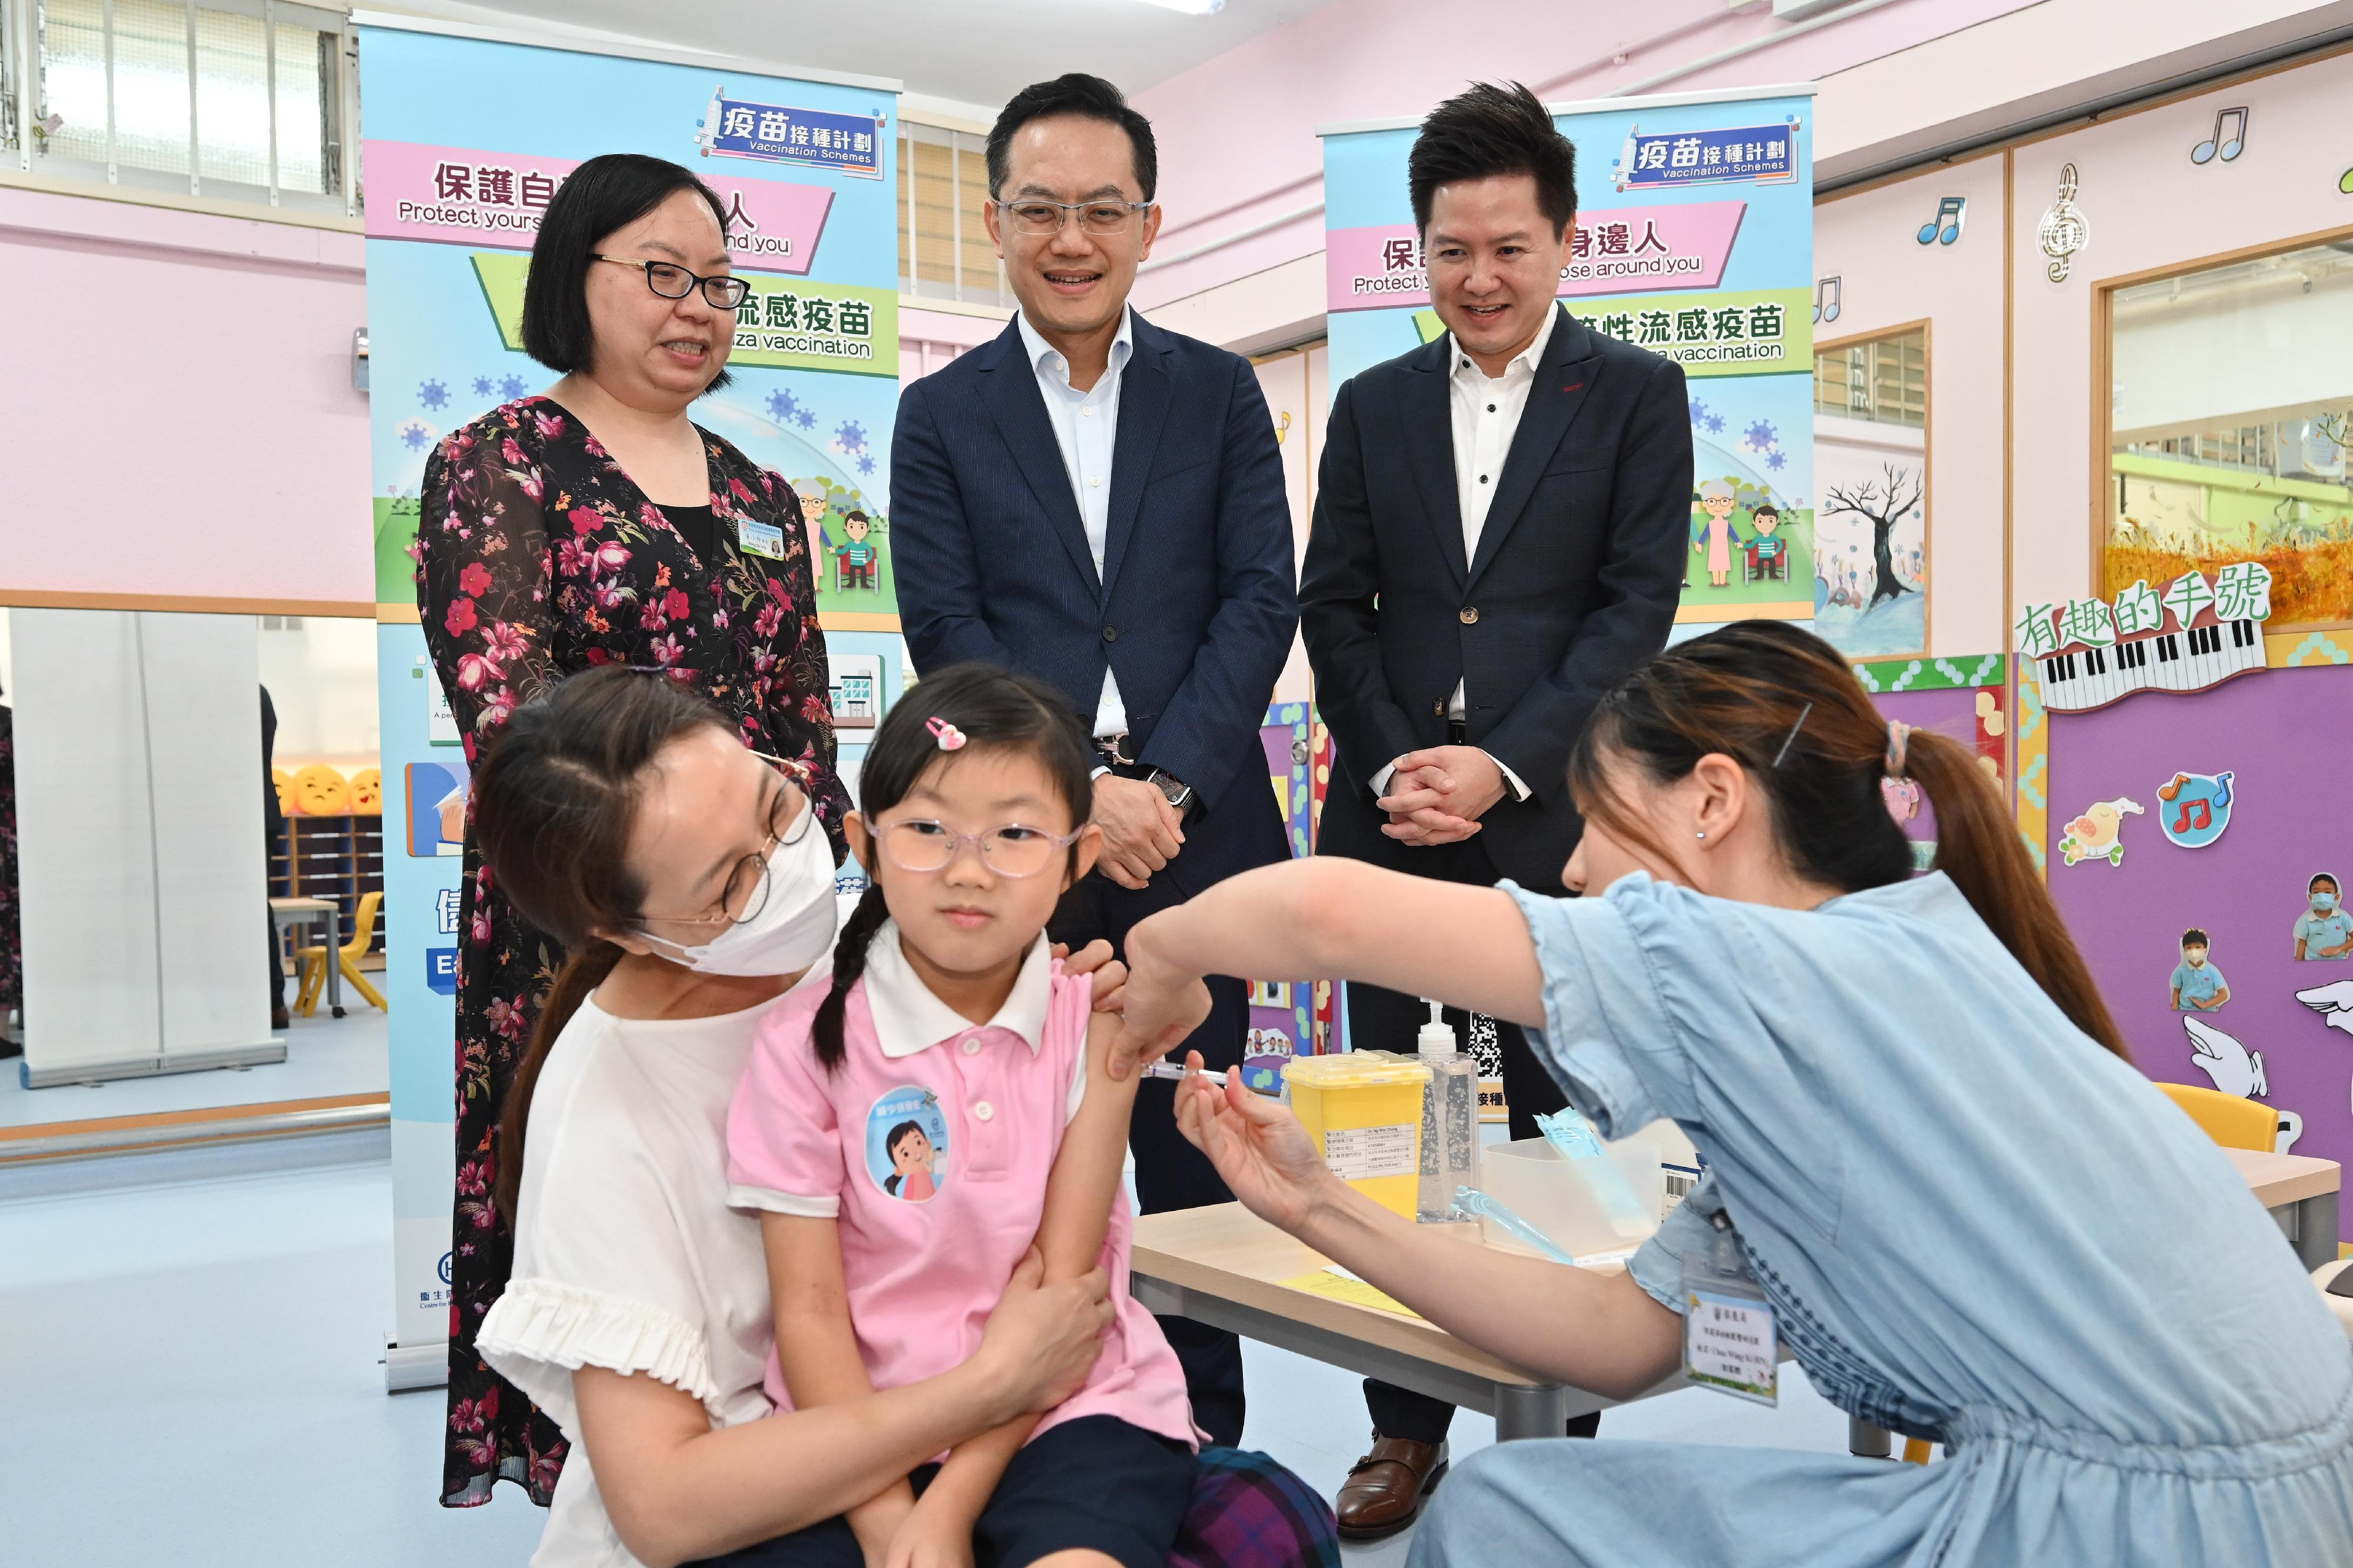 The Director of Health, Dr Ronald Lam, and the Controller of the Centre for Health Protection of the Department of Health, Dr Edwin Tsui, visited Po Leung Kuk Lee Siu Chan Kindergarten-Cum-Nursery in Kwun Tong this morning (November 9) to view the implementation of the school outreach seasonal influenza vaccination service. Photo shows Dr Lam (back row, centre) and Dr Tsui (back row, right) viewing a student receiving seasonal influenza vaccination.